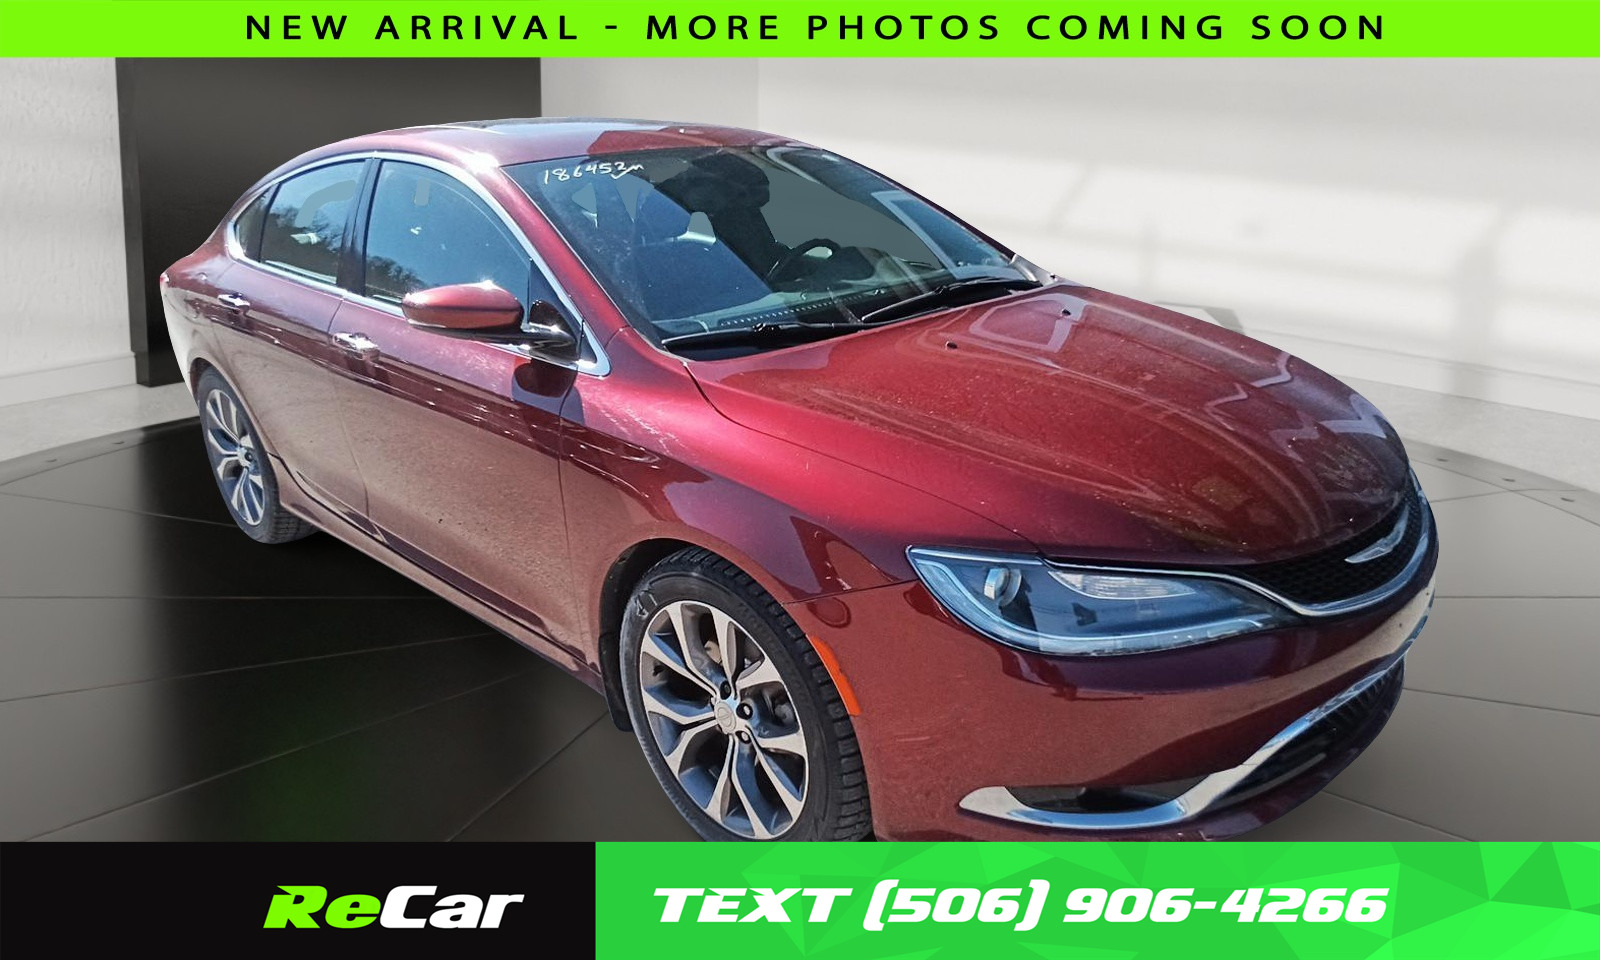 2016 Chrysler 200 Sunroof | Heated Leather Seats | Dual Climate Cont